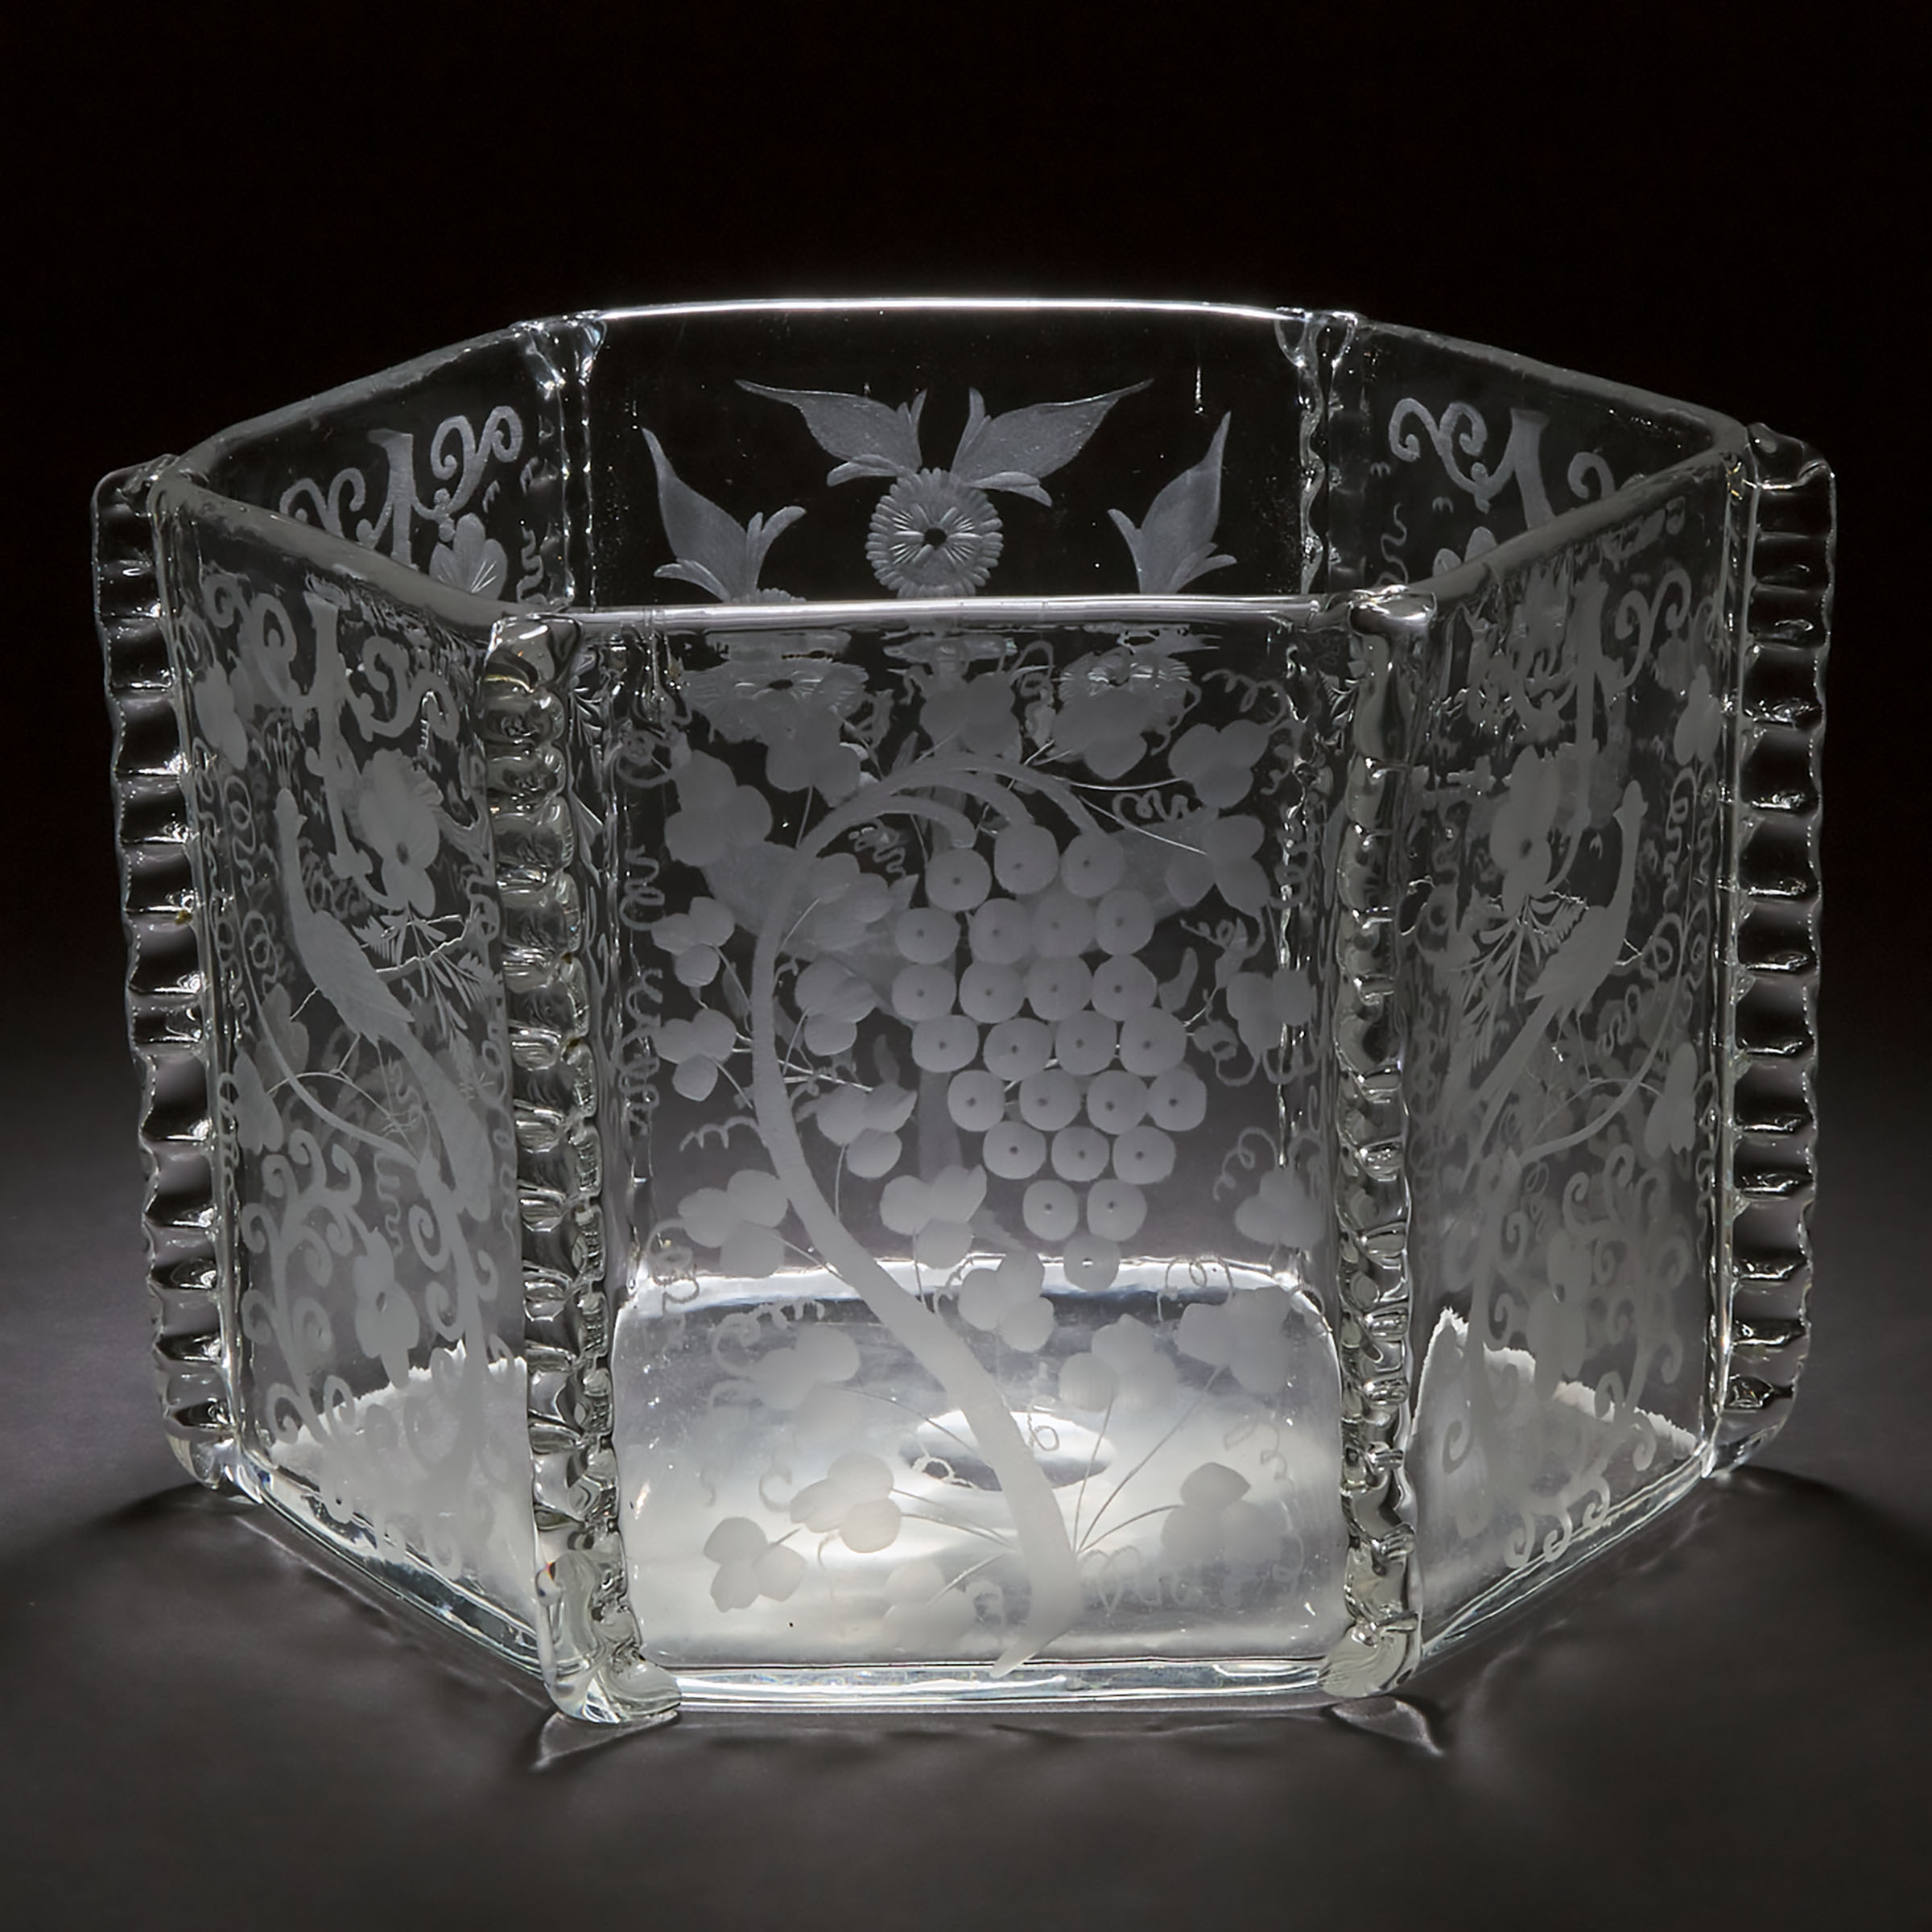 Continental Etched Glass Hexagonal Vase, probably Dutch, late 19th/early 20th century